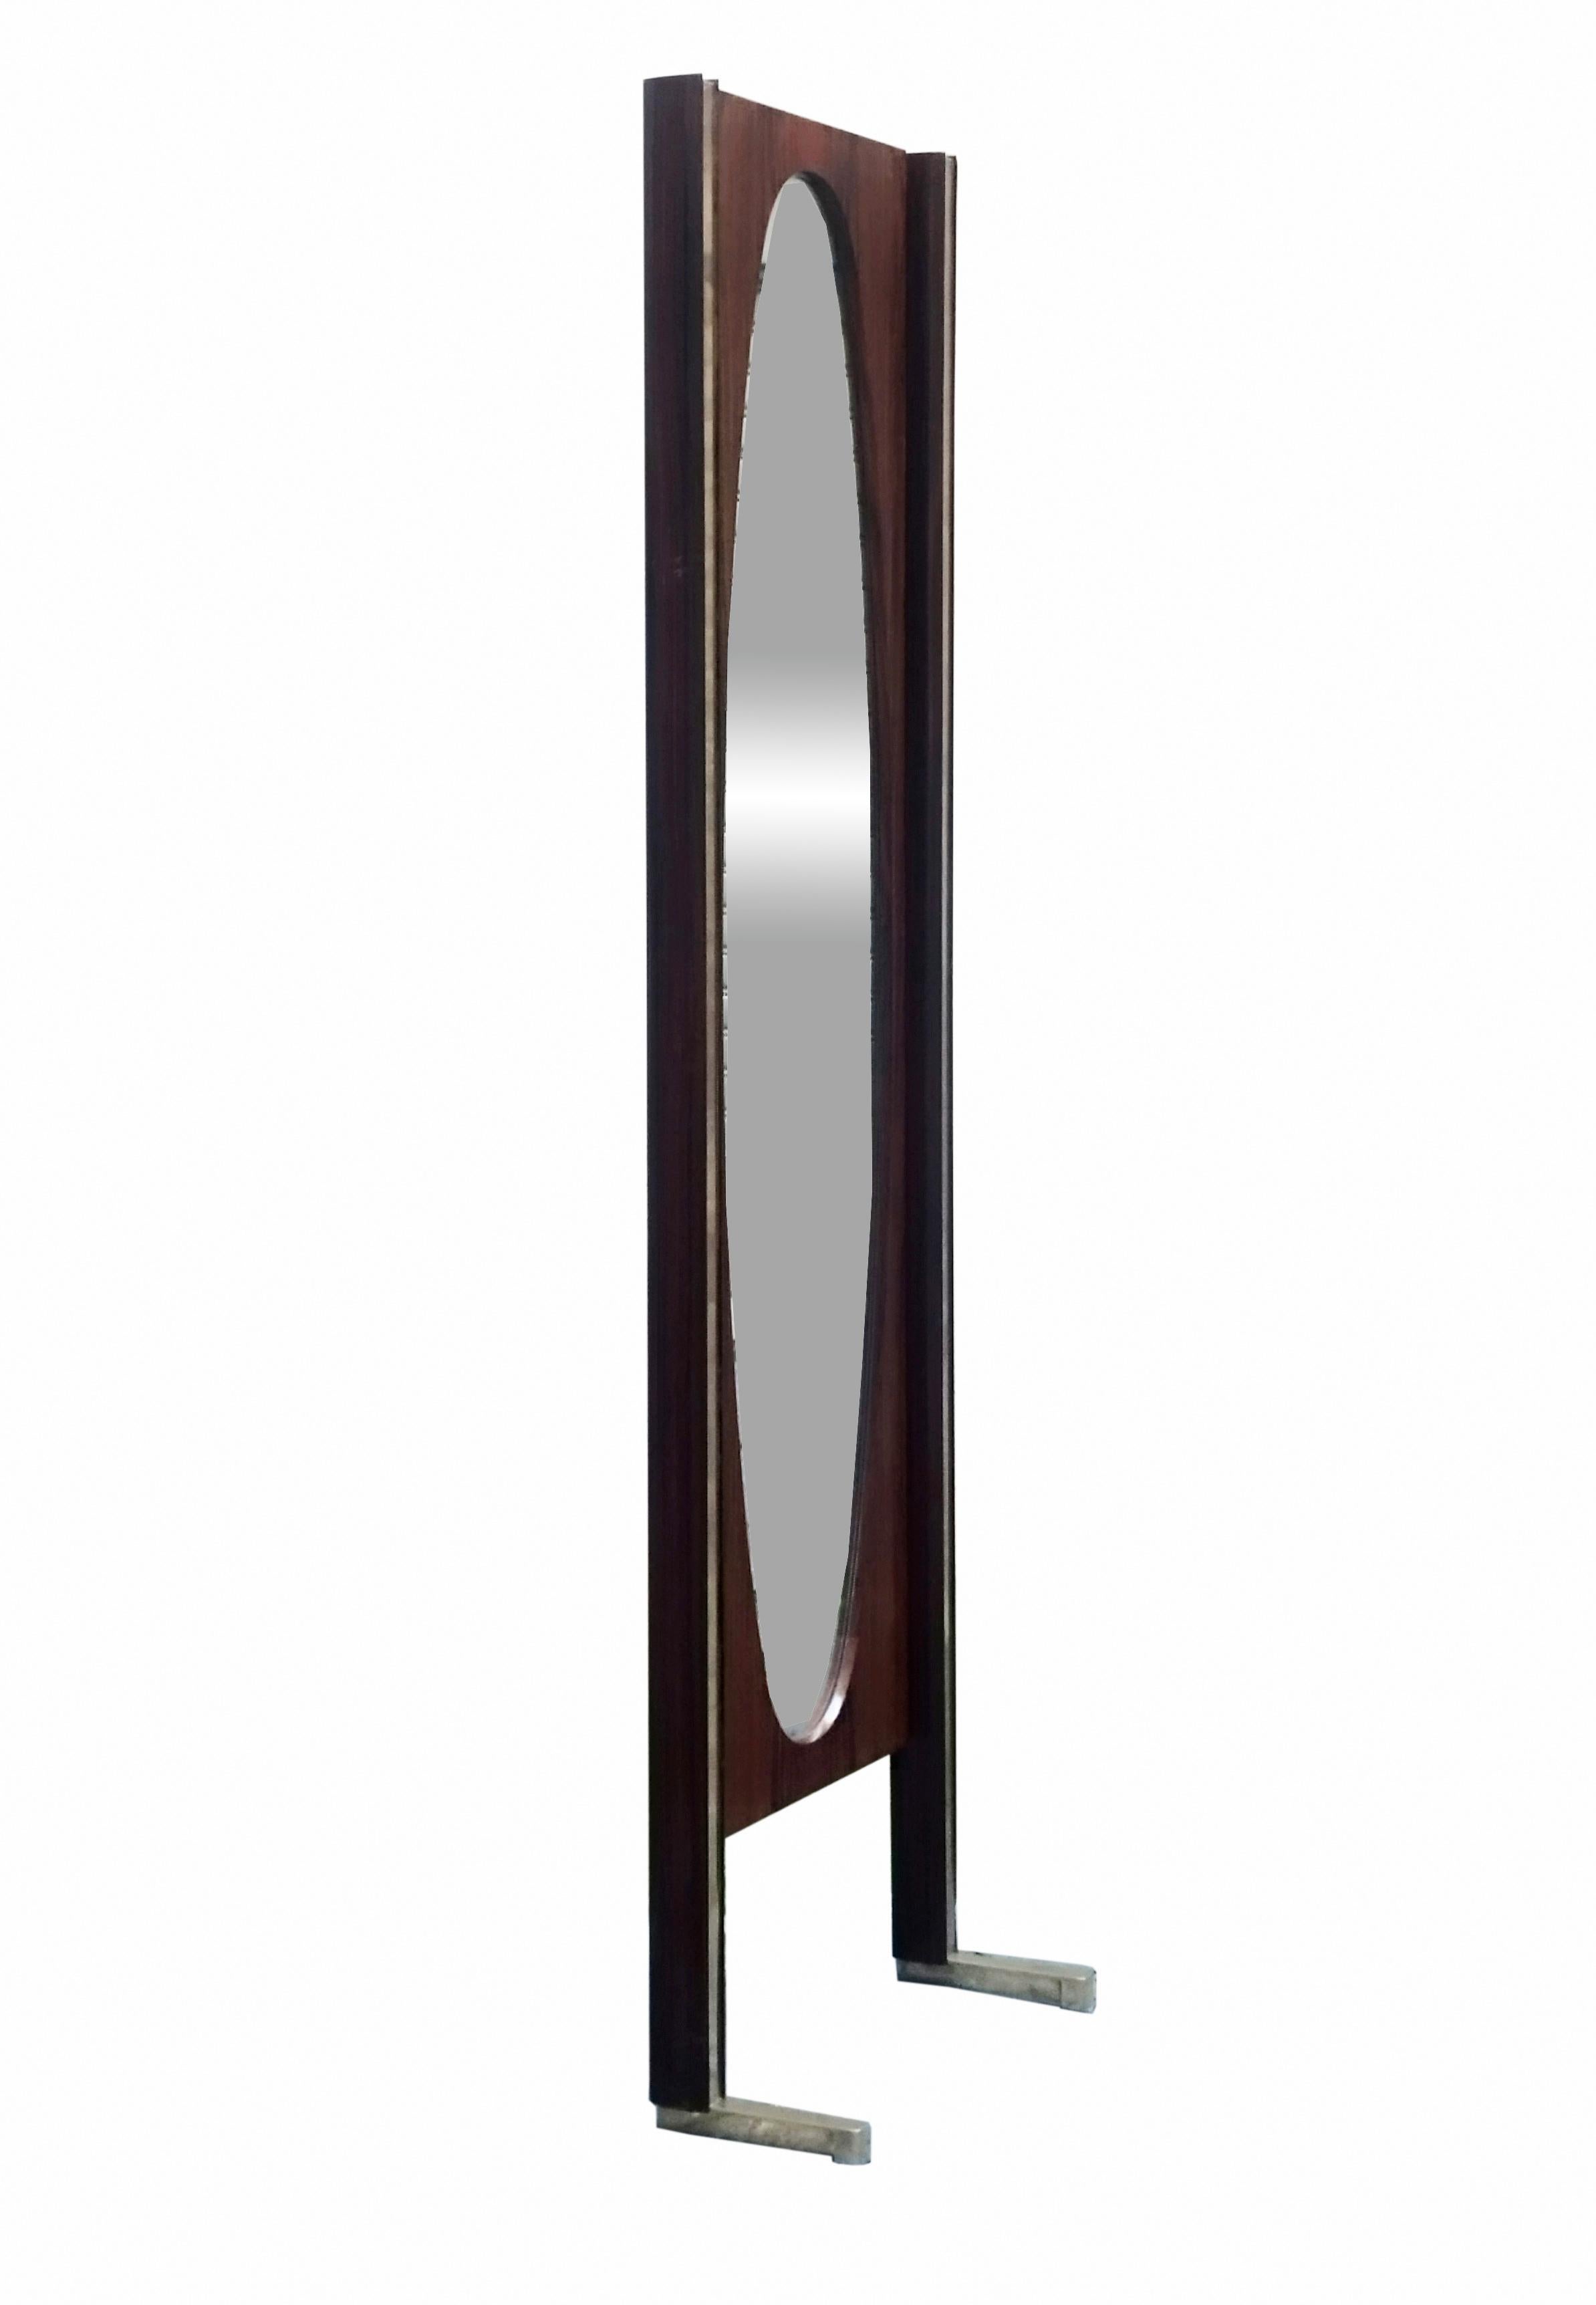 A rare Italian-made floor mirror produced in the 1960s, with a wooden frame and brass profiles resting on heavy brass feet. An oval mirror is mounted inside.